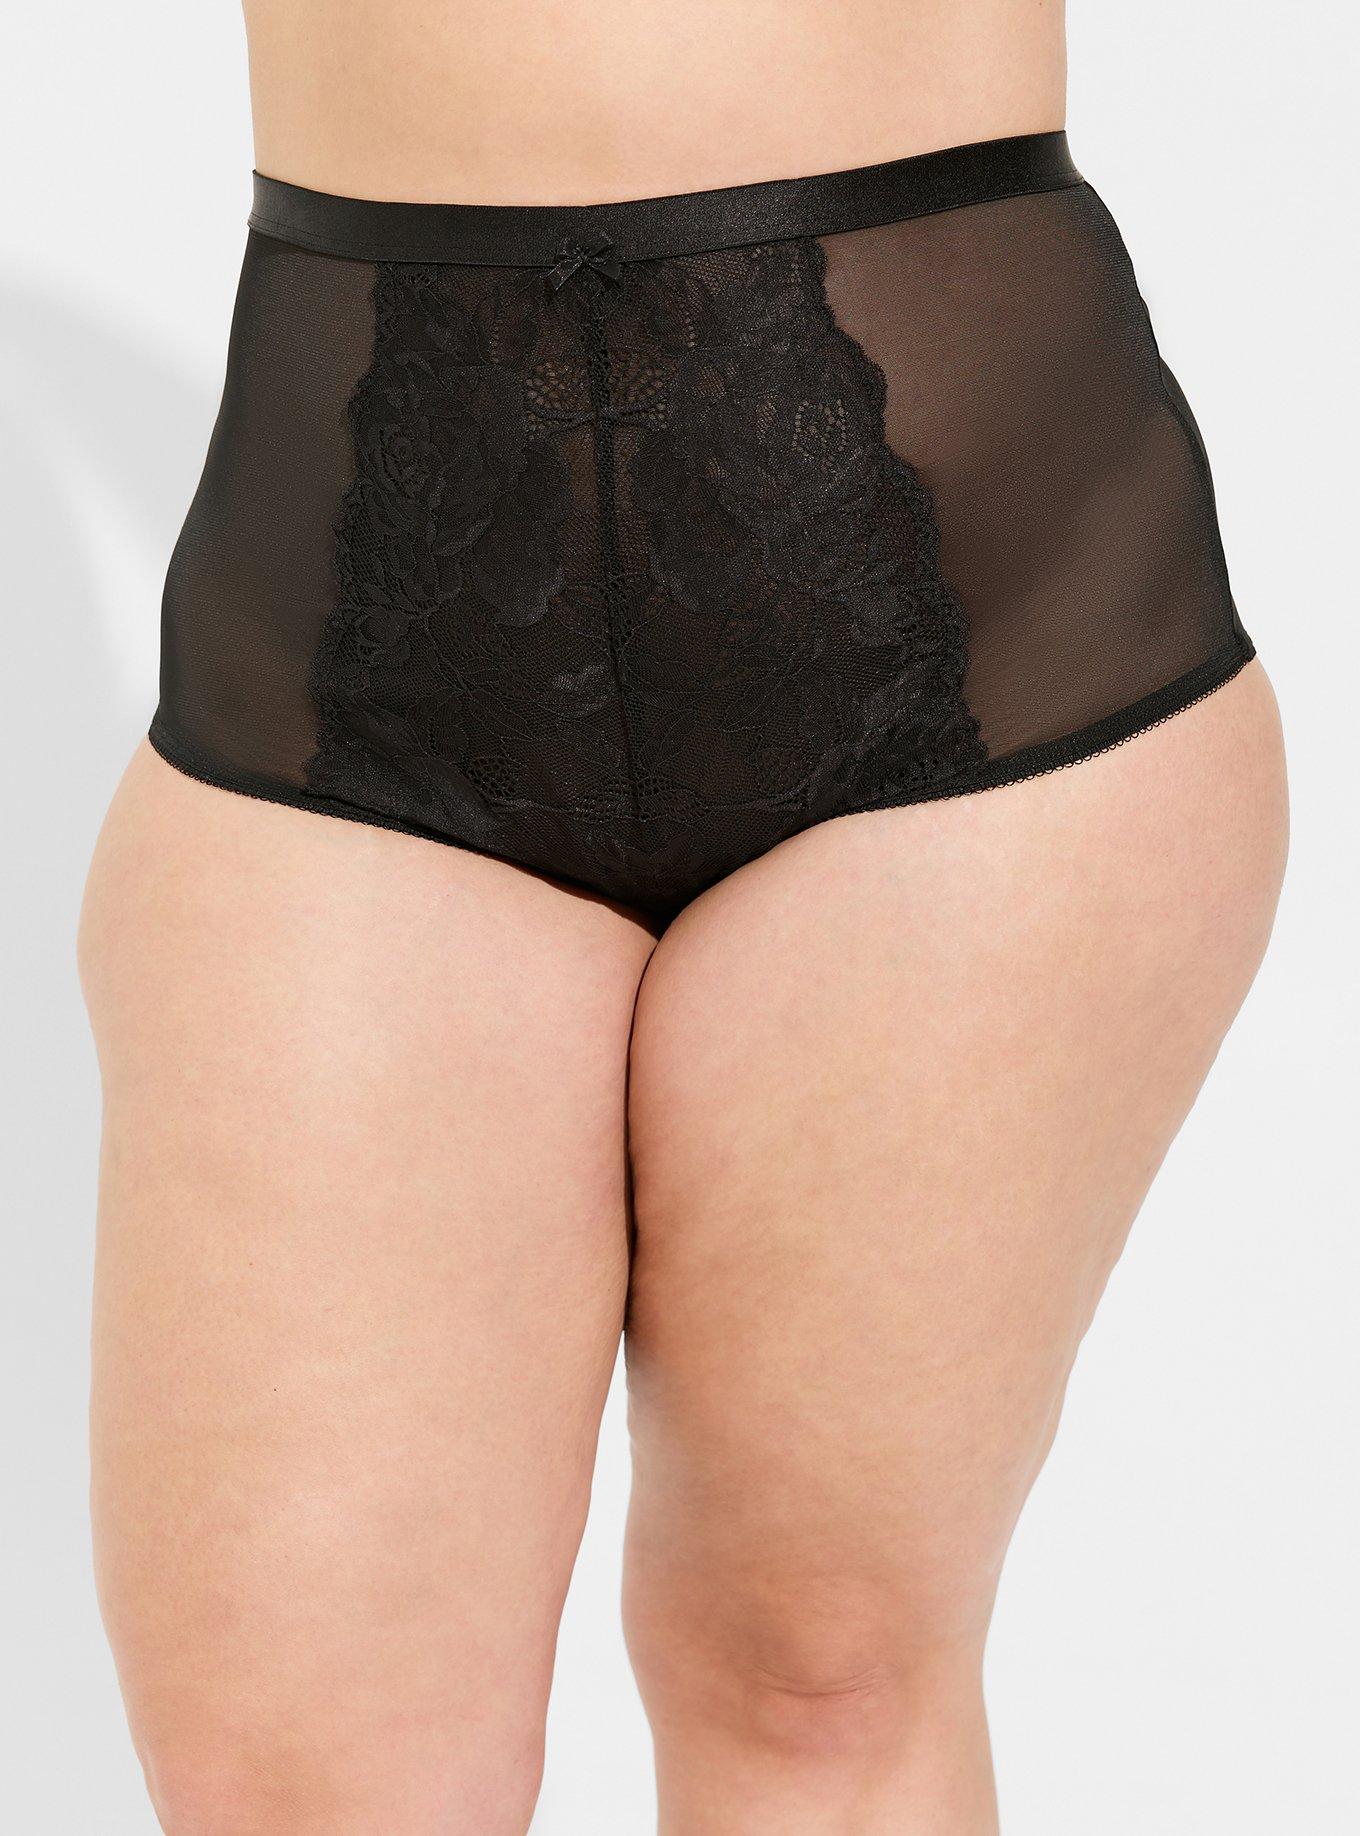 Openwork lace knickers with floral patterns in flame-red Daily Dentelle